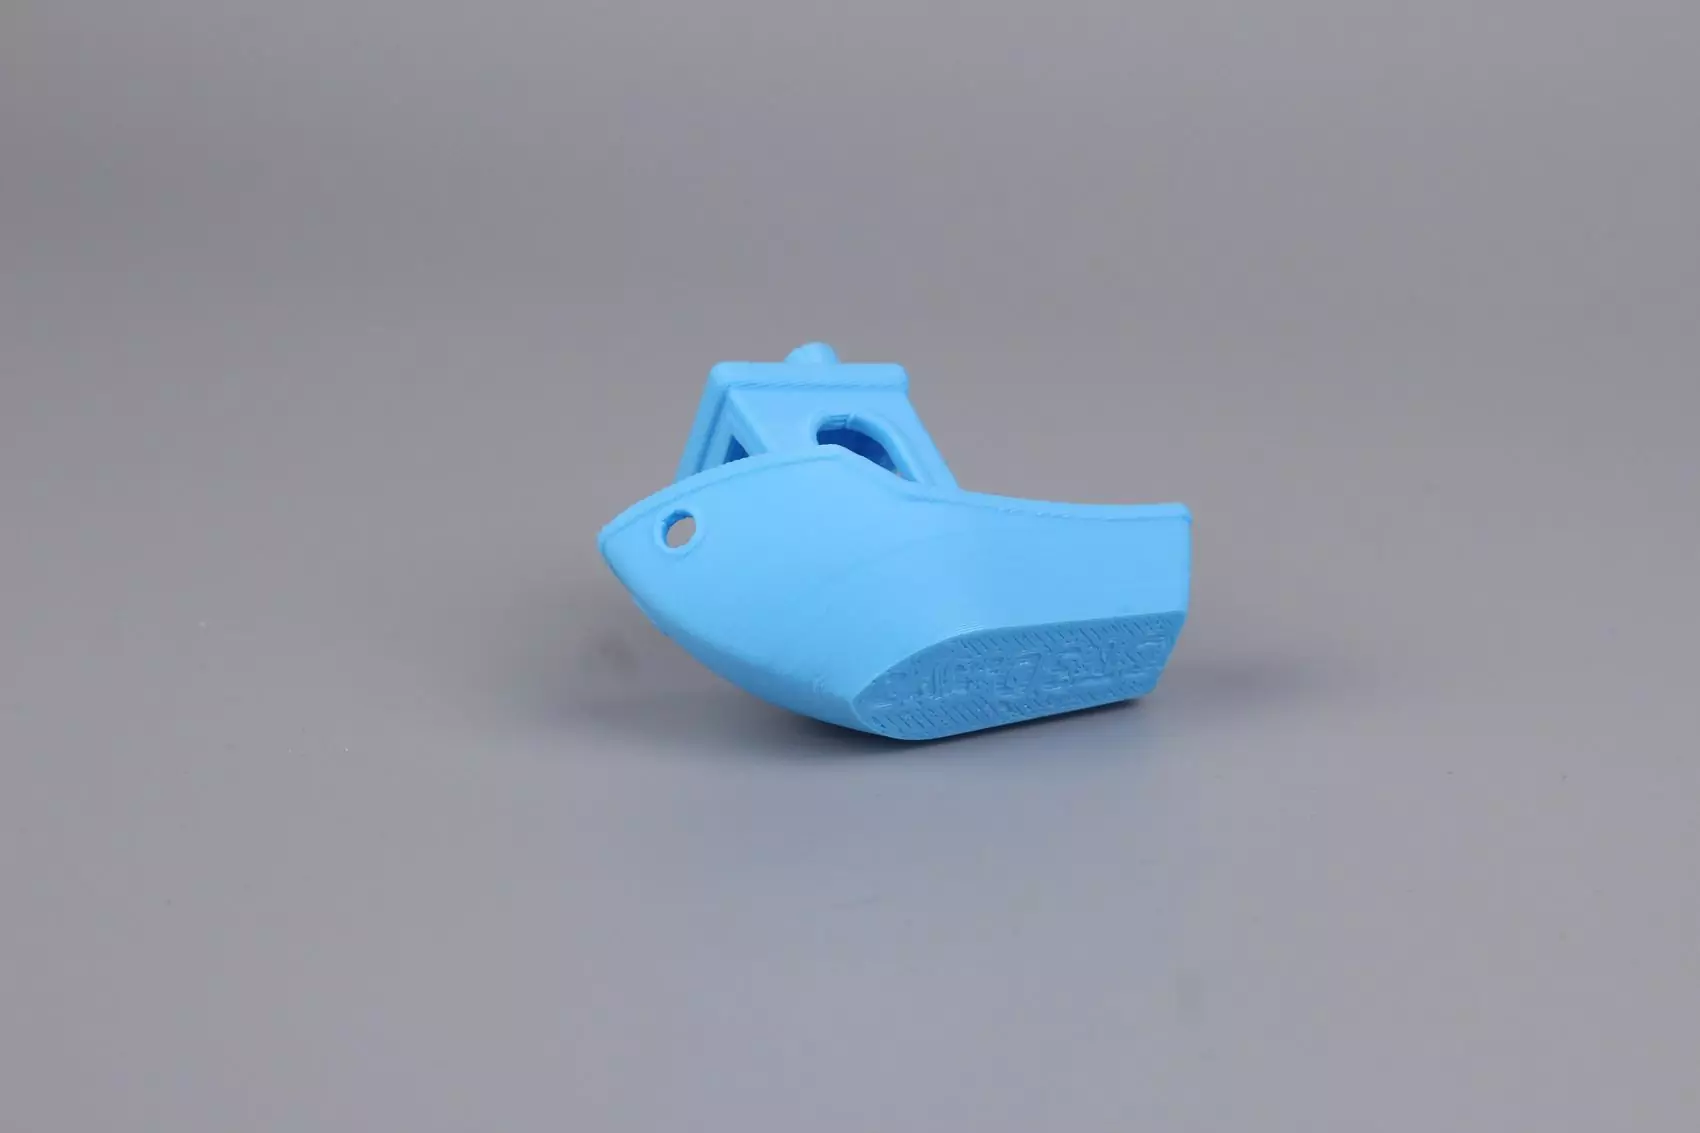 Ender 5 S1 Review 3D benchy4 | Creality Ender-5 S1 Review: Is it a worthy upgrade?